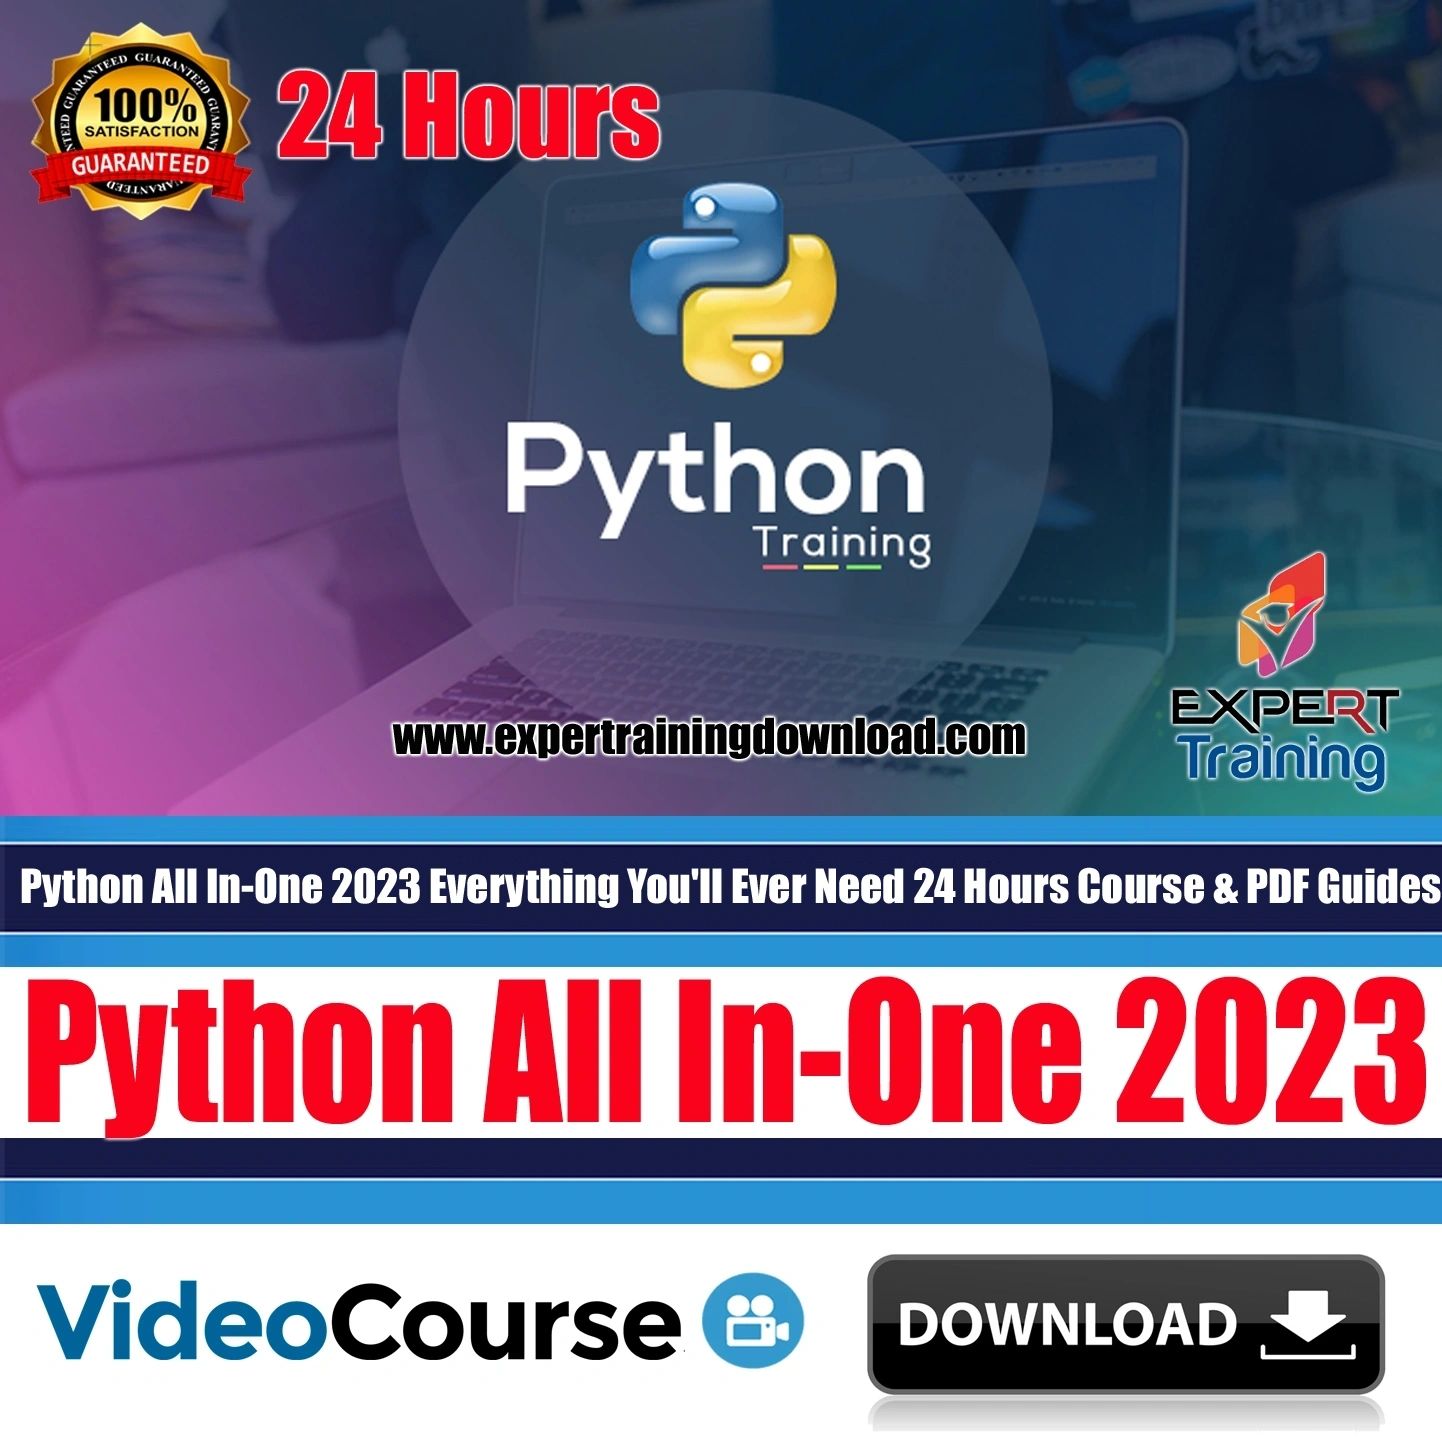 Python All In-One 2023 (24 Hours) Course & PDF Guides